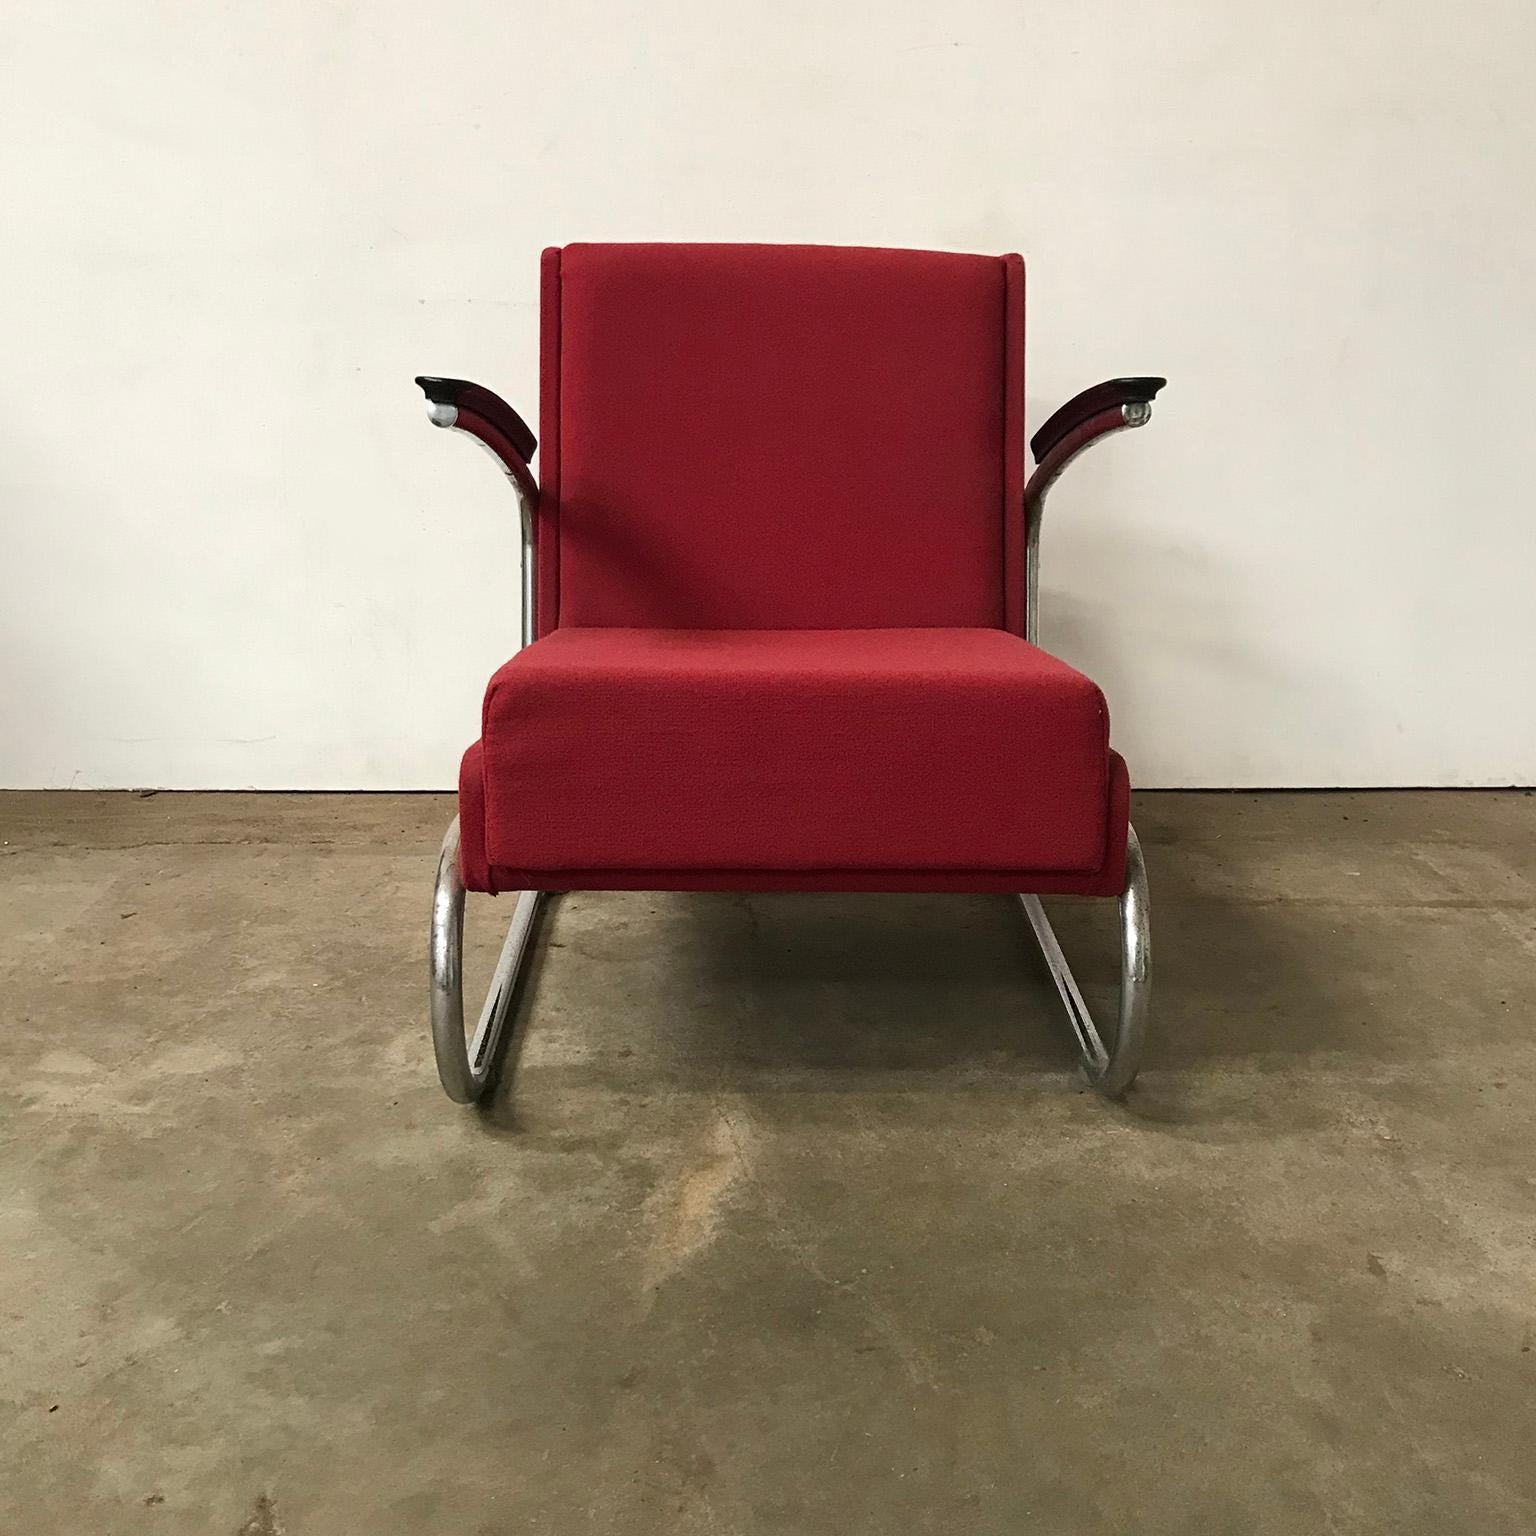 Dutch Tubular Easy Chair in Burgundy Red and Black Armrests, circa 1930 3